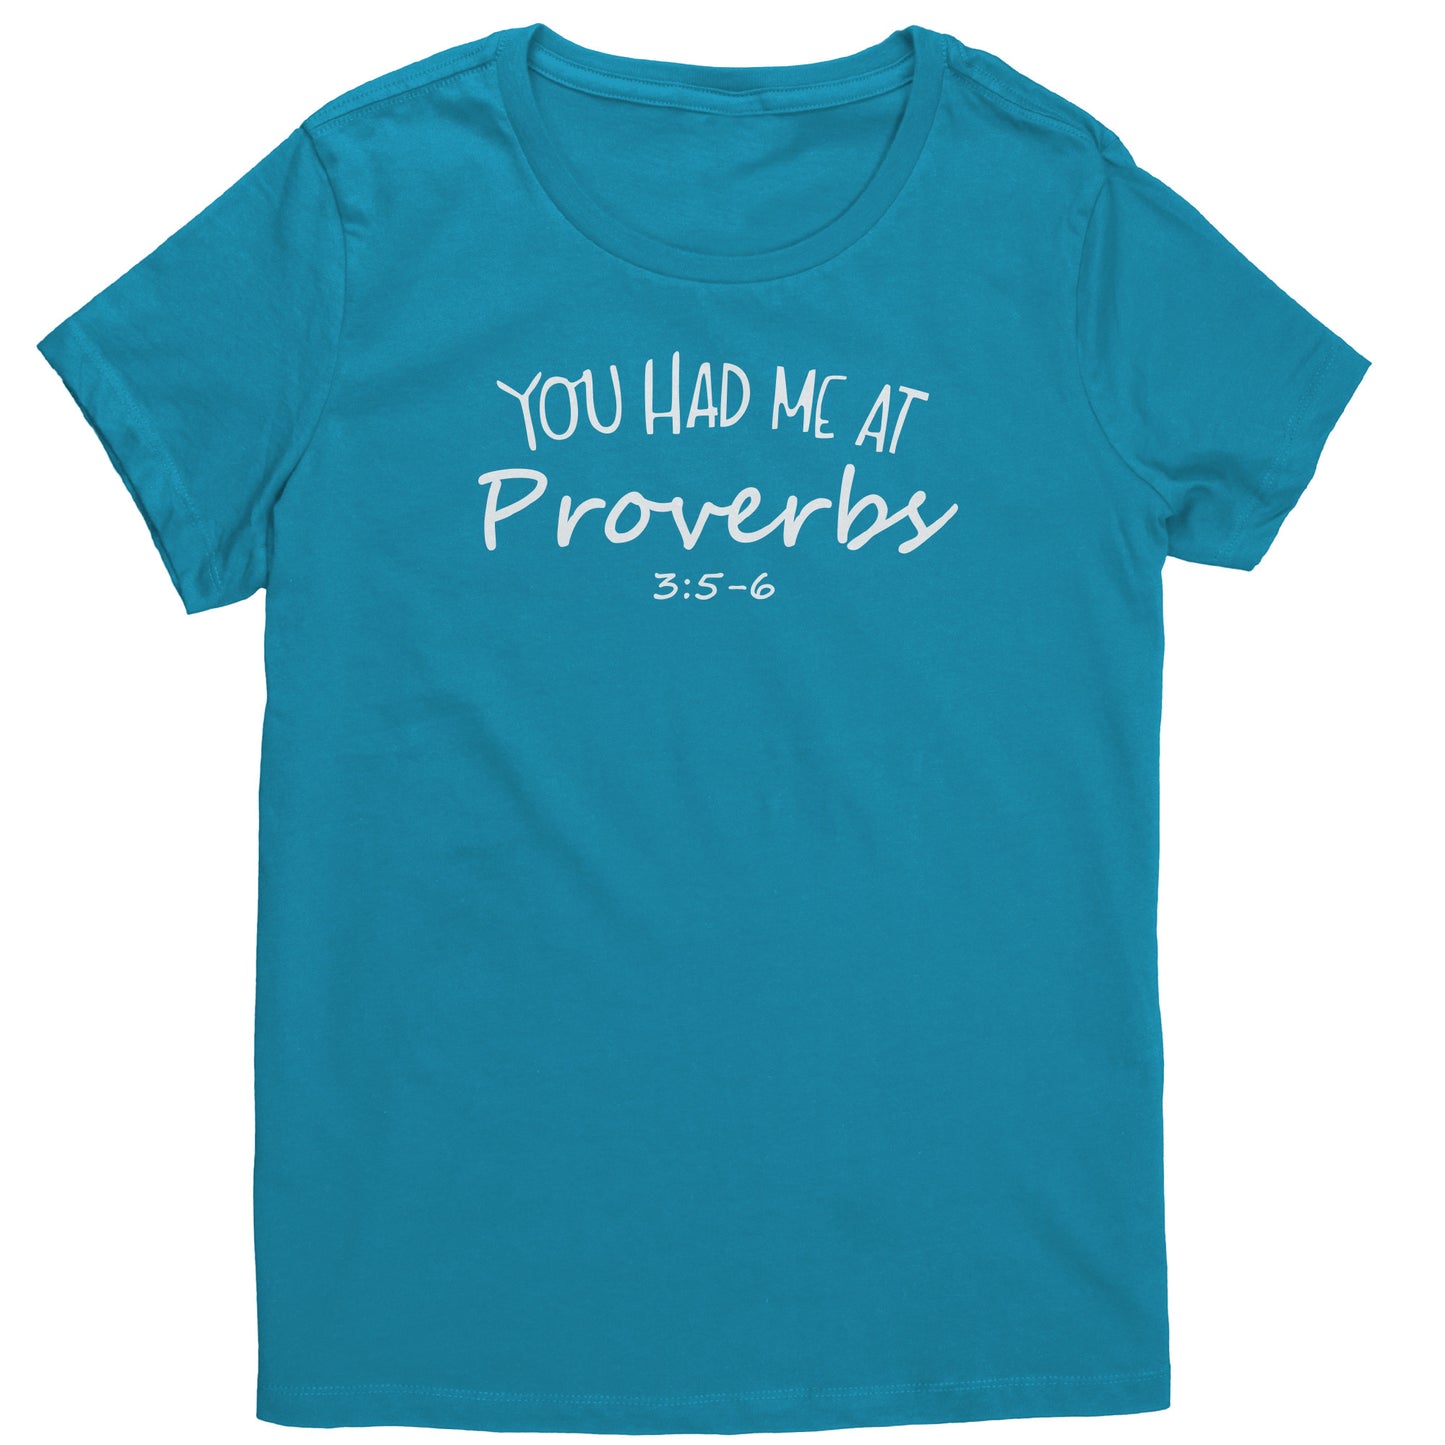 You Had Me At Proverbs 3:5-6 Women's T-Shirt Part 2